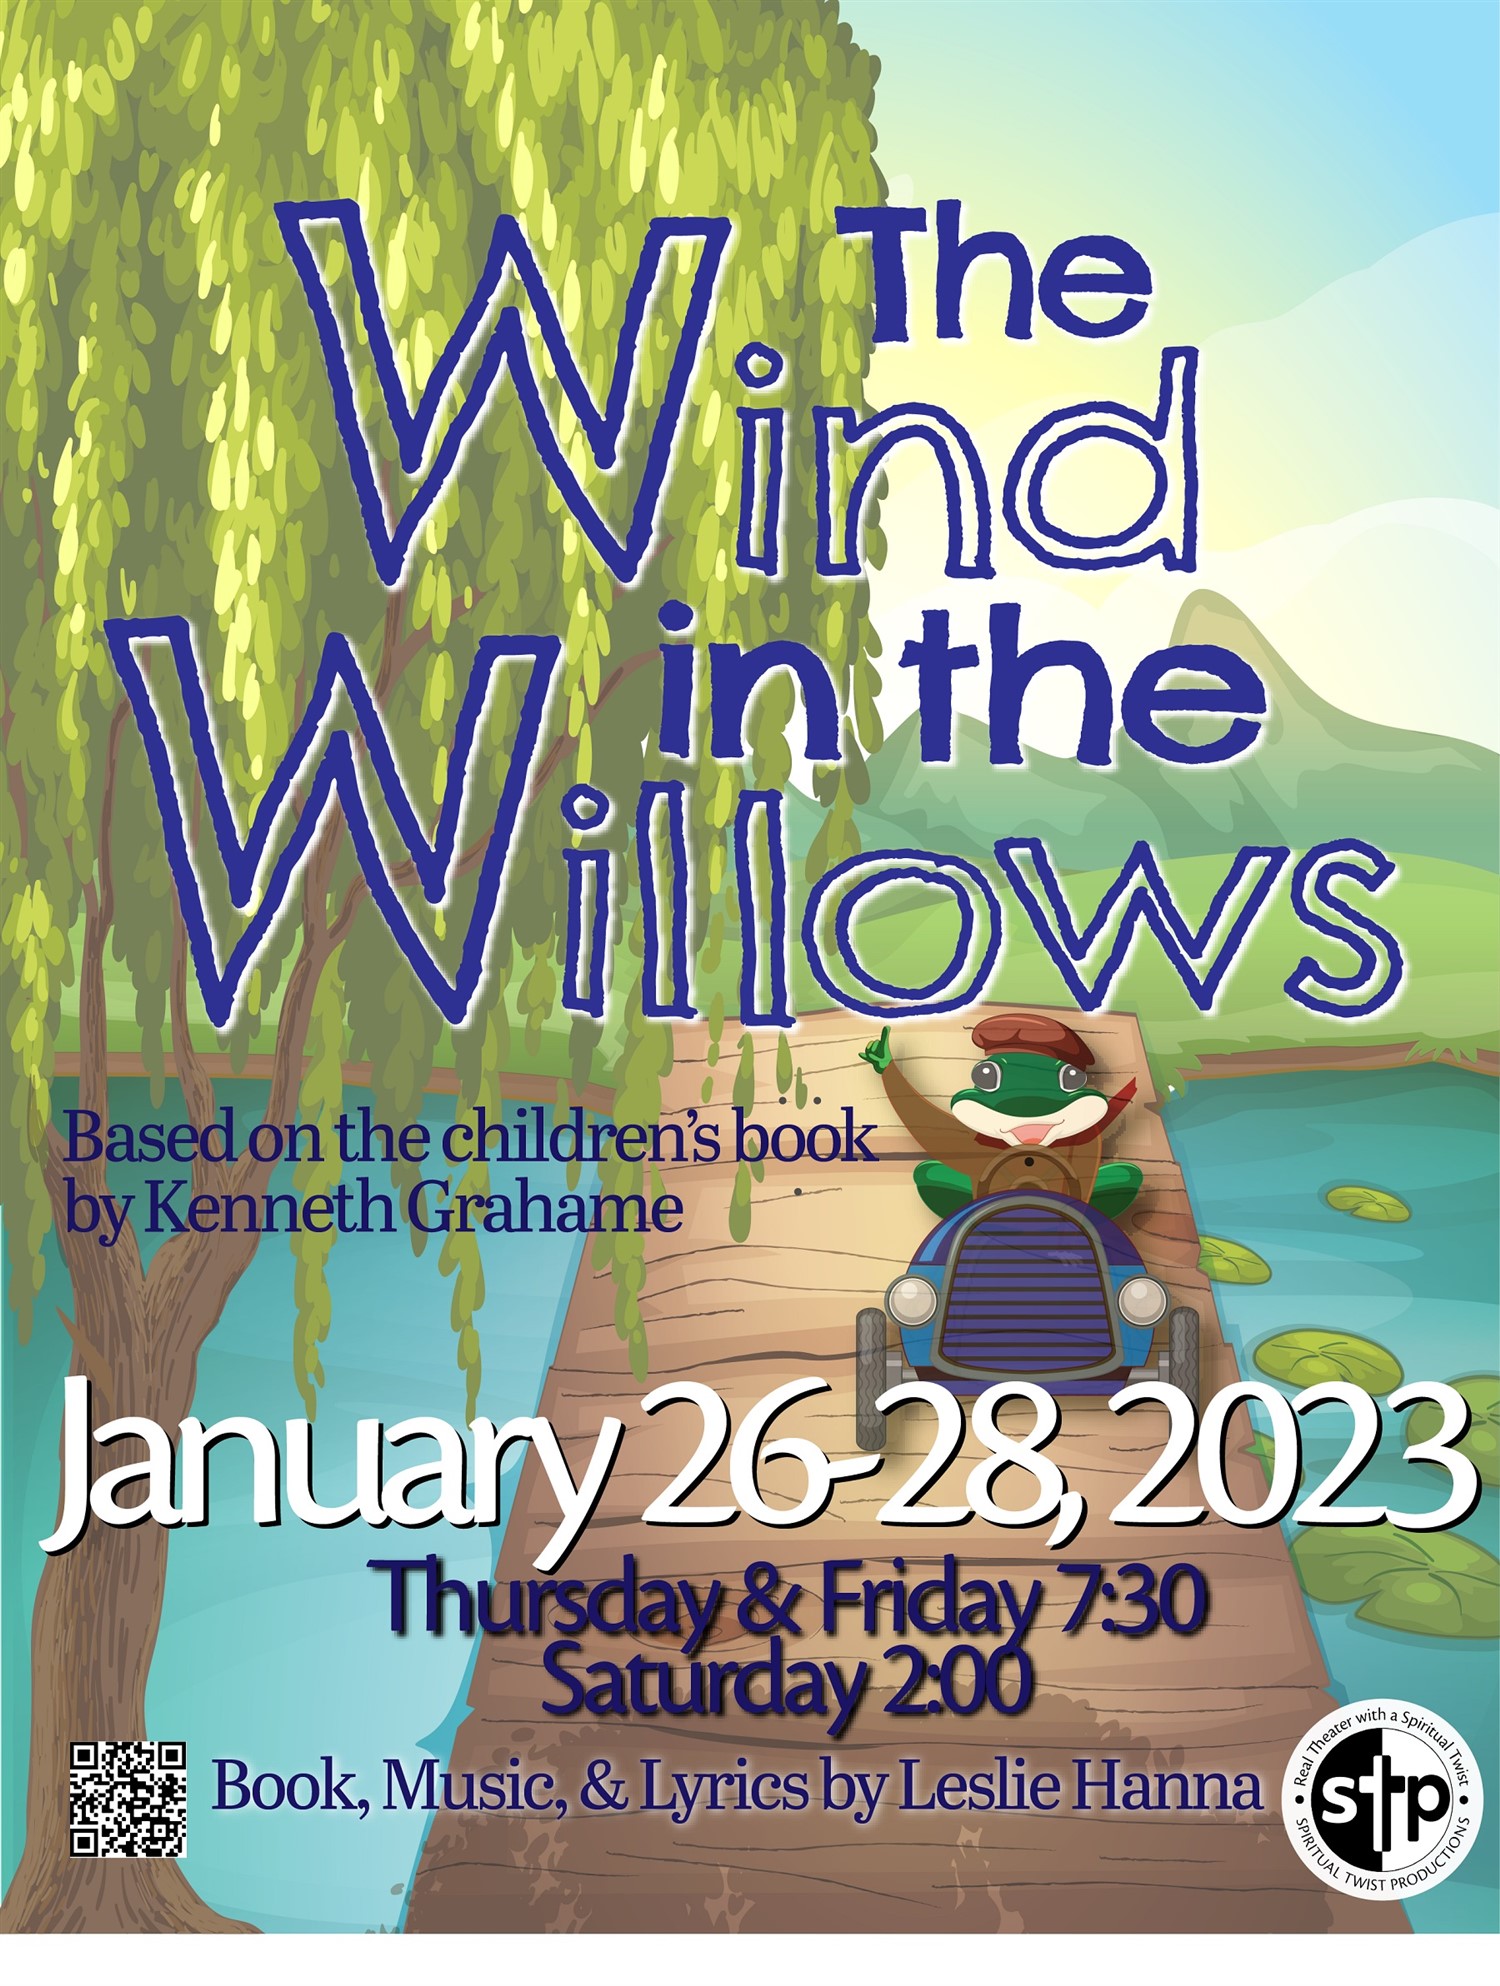 The Wind in the Willows Thursday, January 26, 2023 @ 7:30 PM on Jan 26, 19:30@Spiritual Twist Productions - Pick a seat, Buy tickets and Get information on Spiritual Twist Productions tickets.spiritualtwist.com